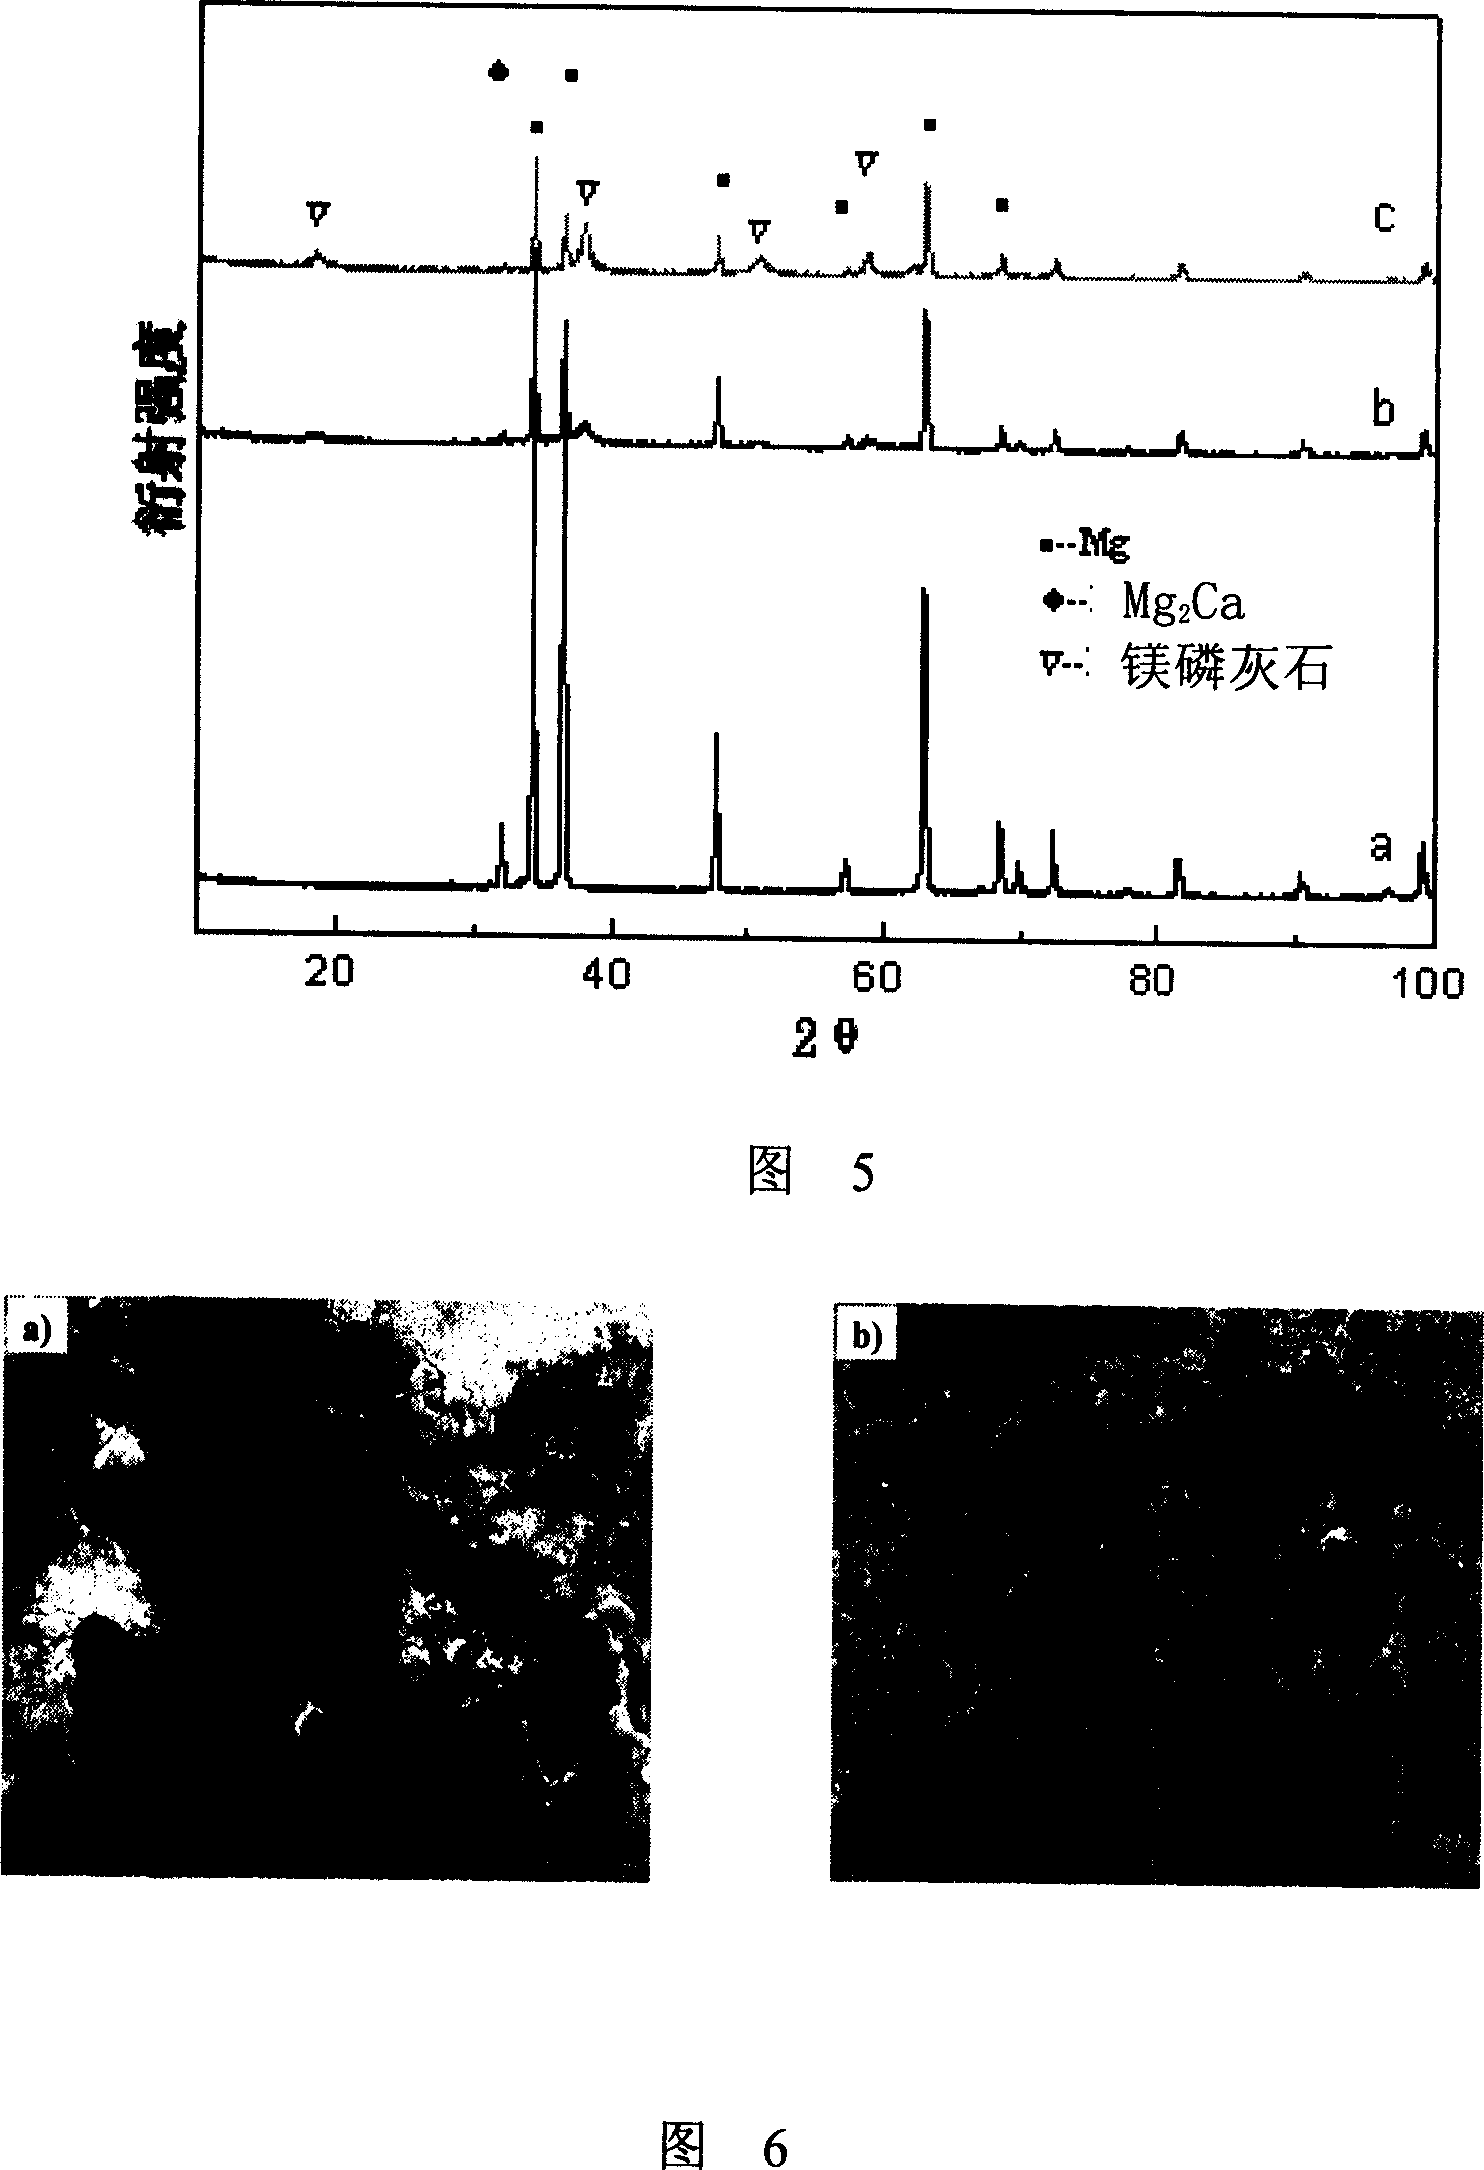 Medical implantation material capable of by degraded by body fluid and its preparing process